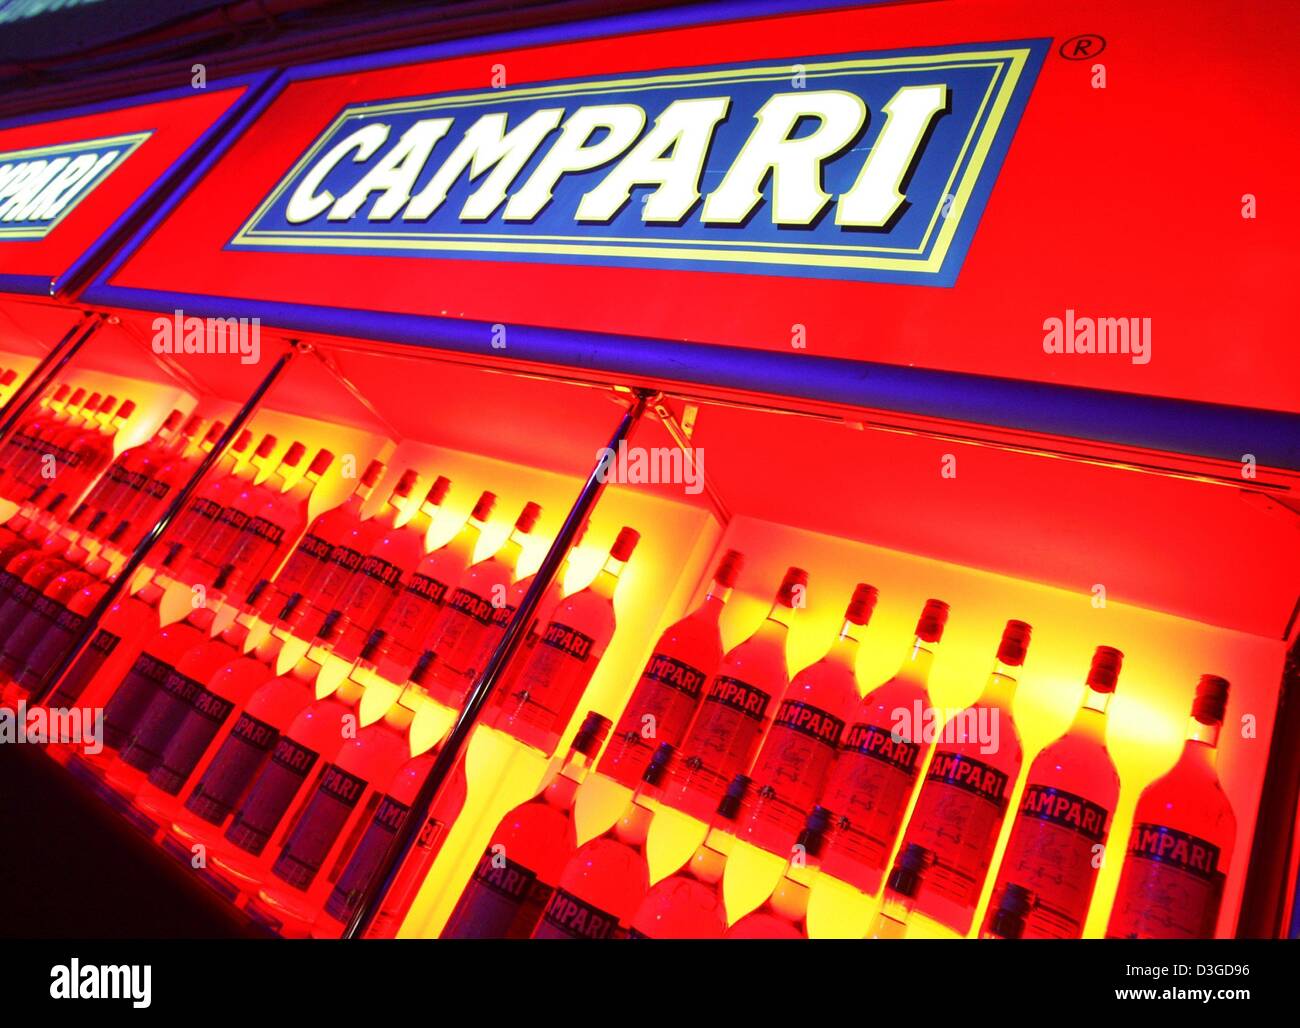 (dpa) - A view of the Campari bar at the MTV show Designerama on Stage at the Congress- and Event Center in Berlin, 29 September 2004. The MTV party was held on the sidelines of the Popkomm 2004 music fair. Stock Photo